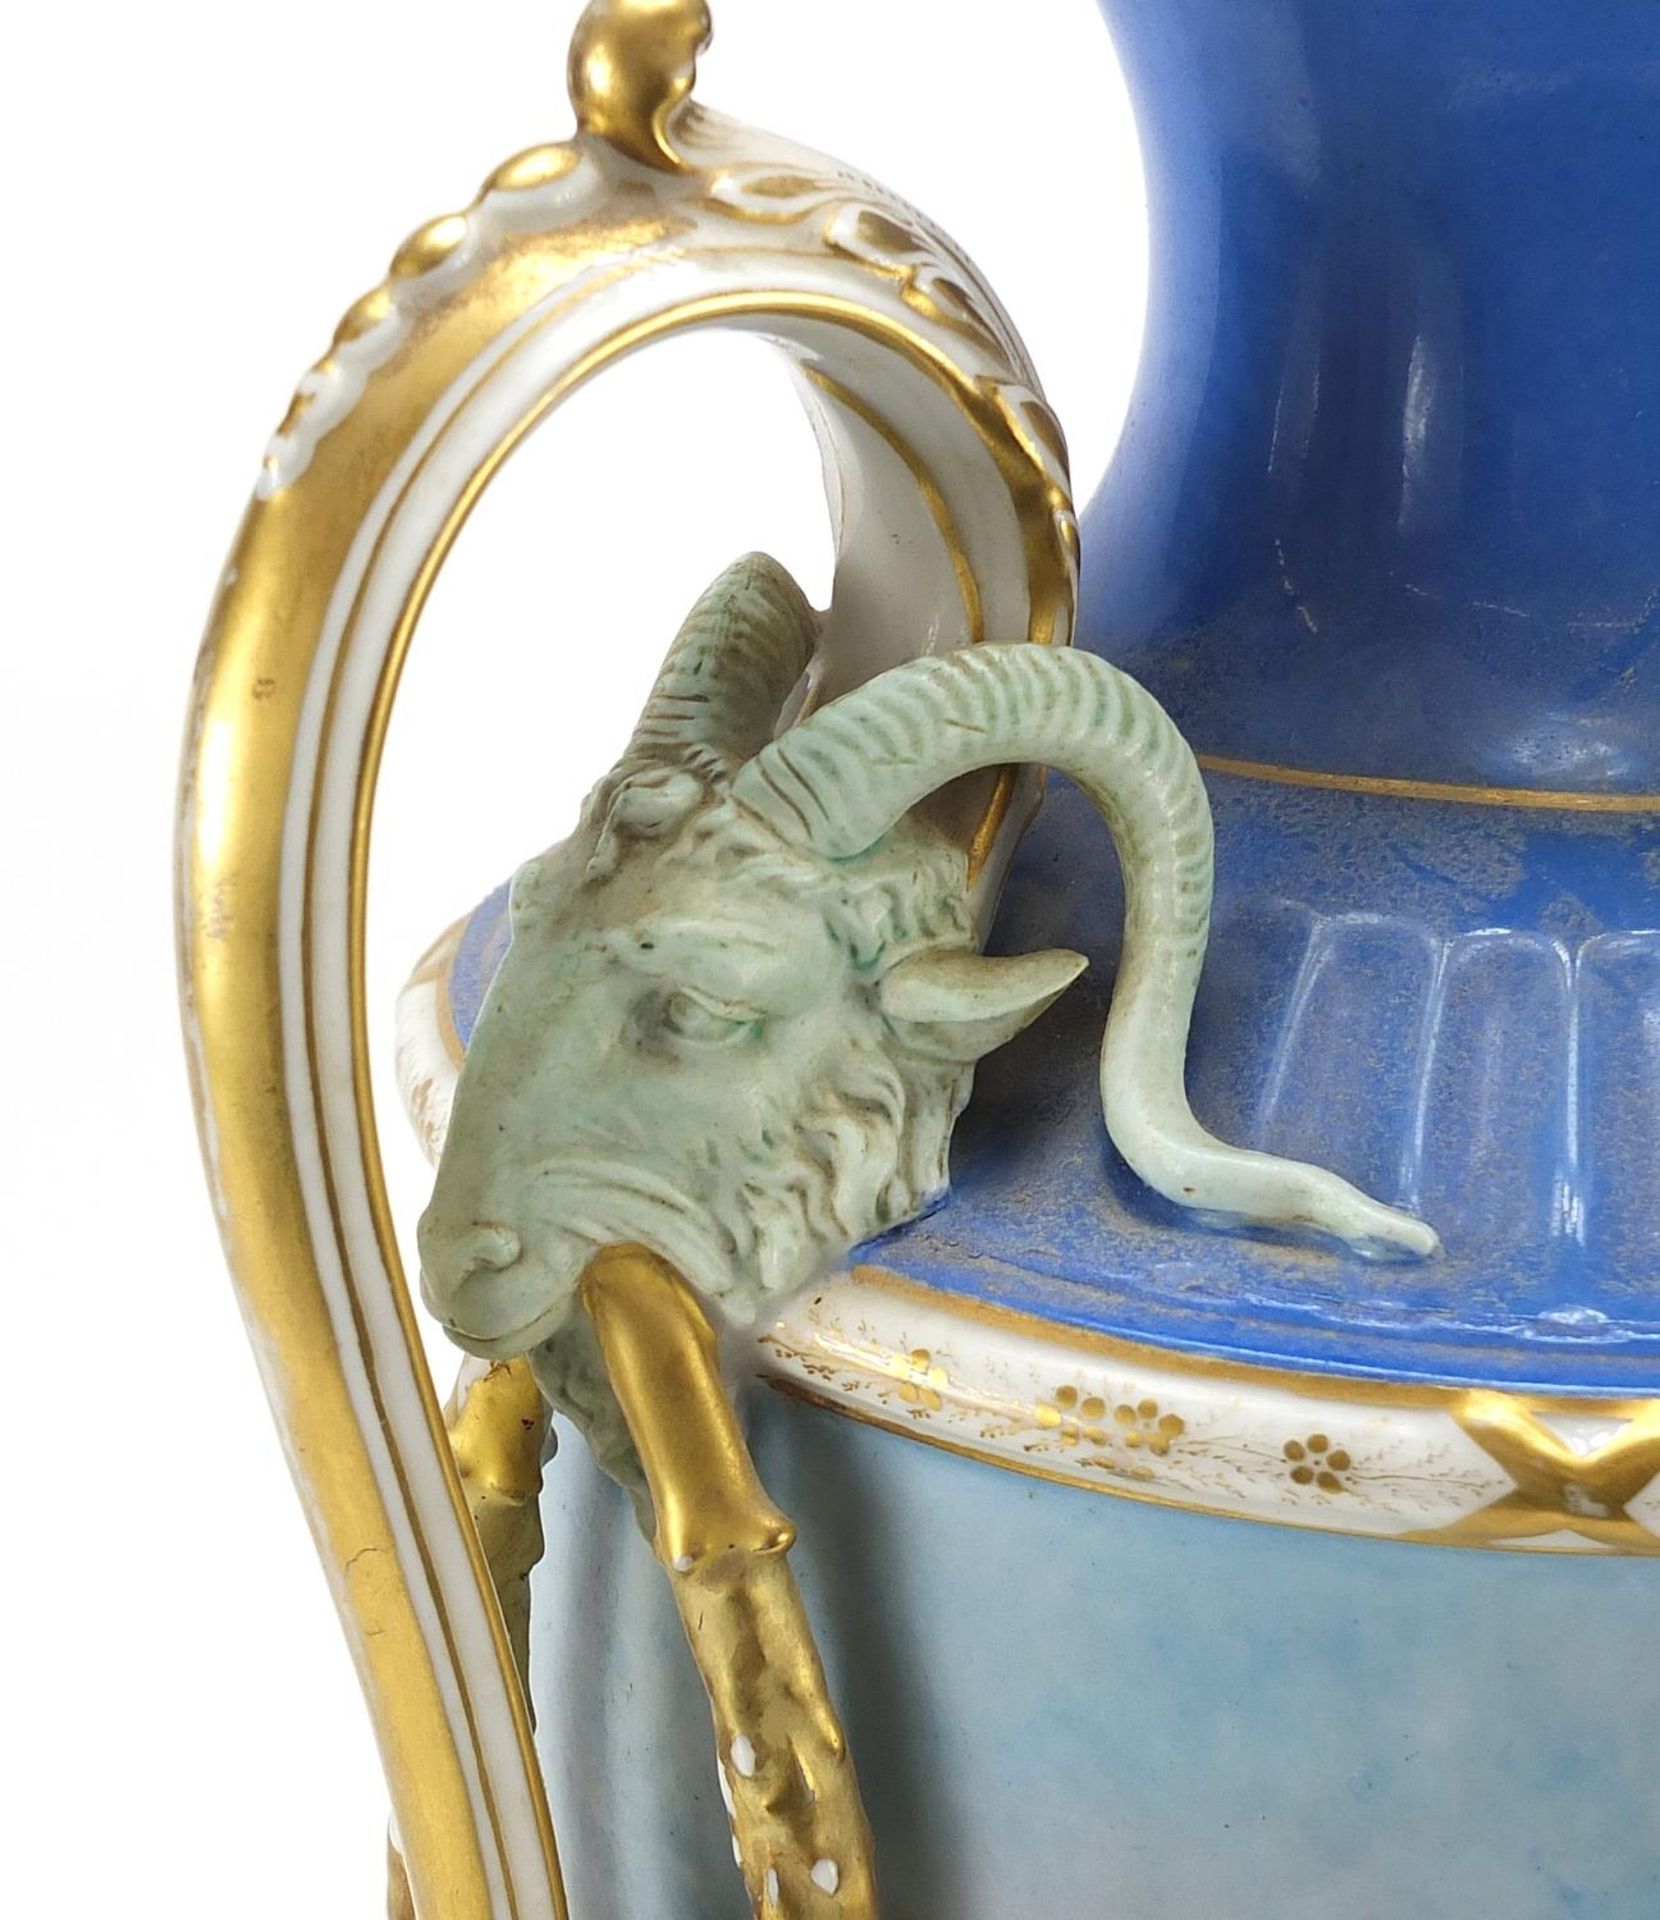 Large 19th century porcelain vase with twin goat head handles, hand painted with a young gypsy - Image 2 of 4